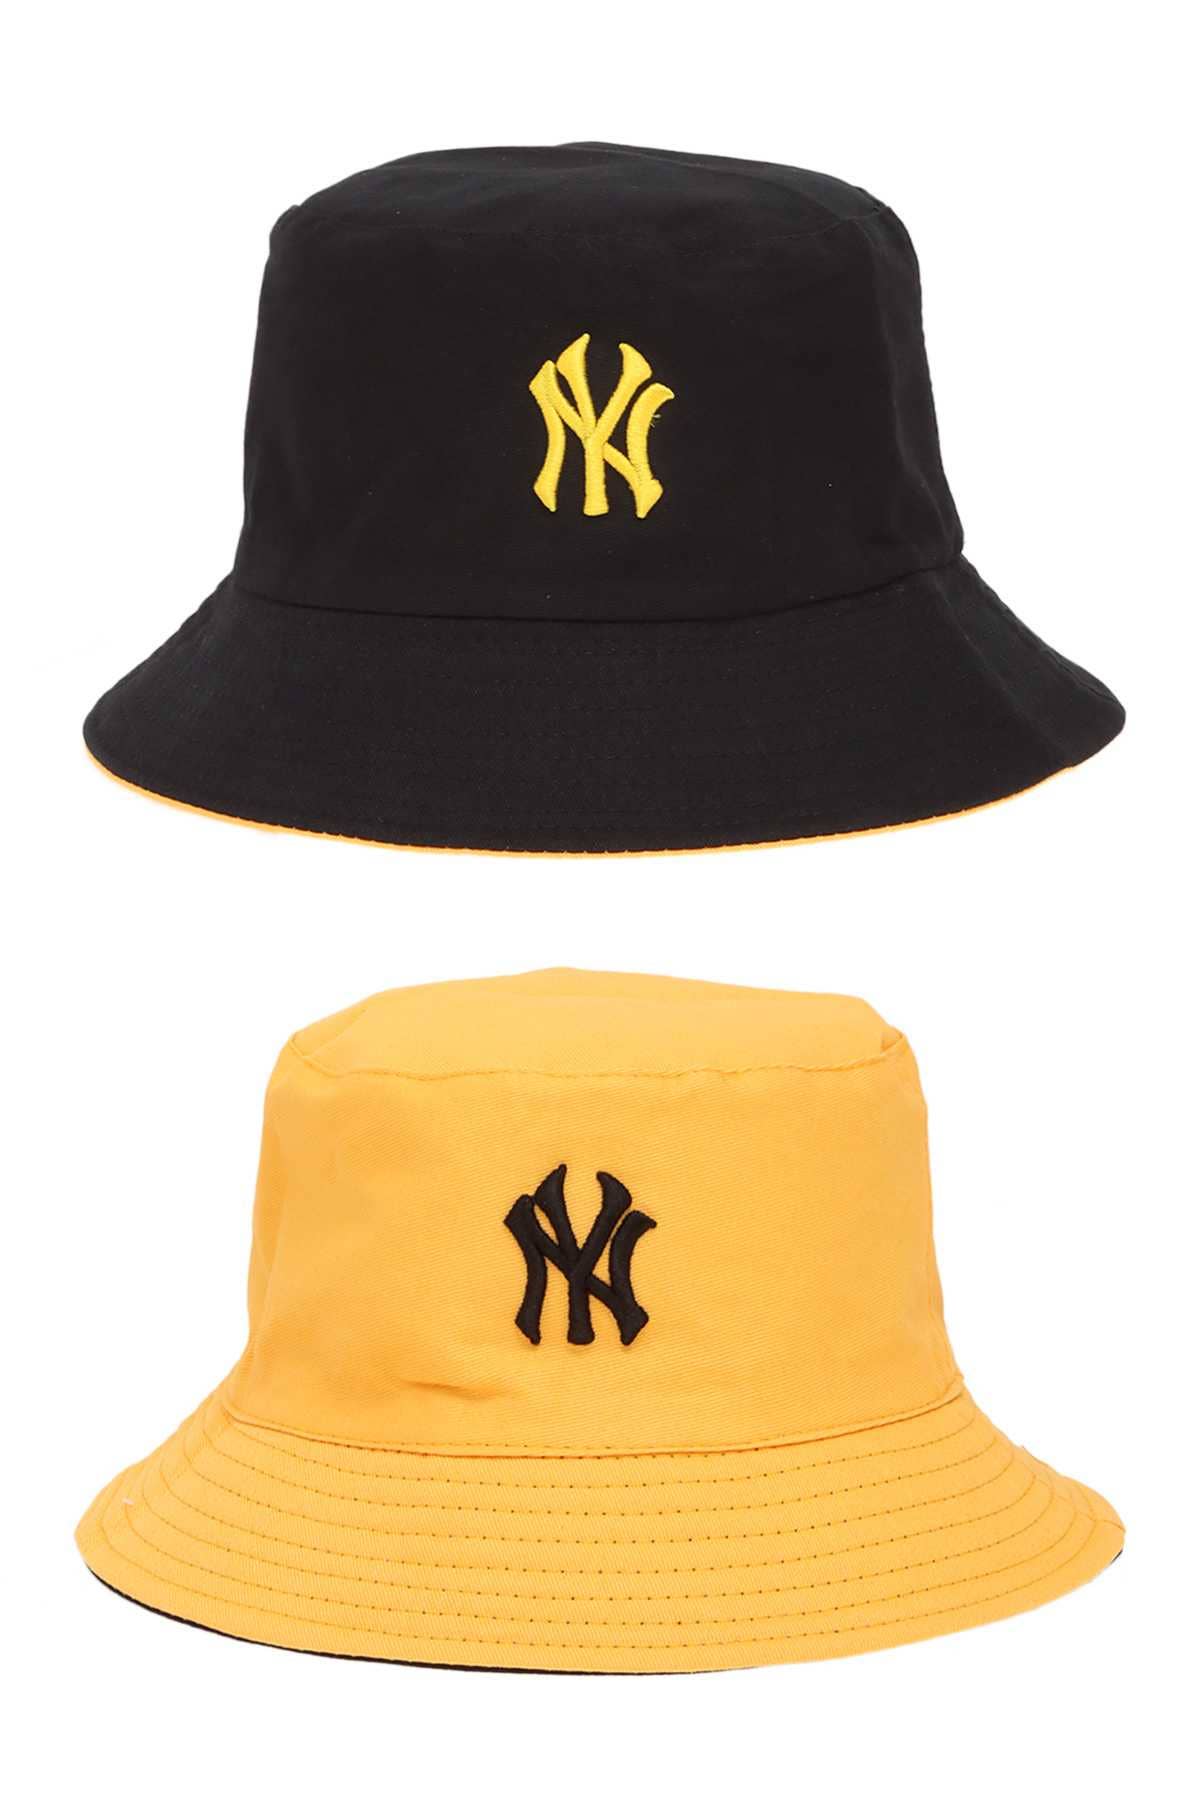 NY 3D Embroidery Reversible Bucket Hat